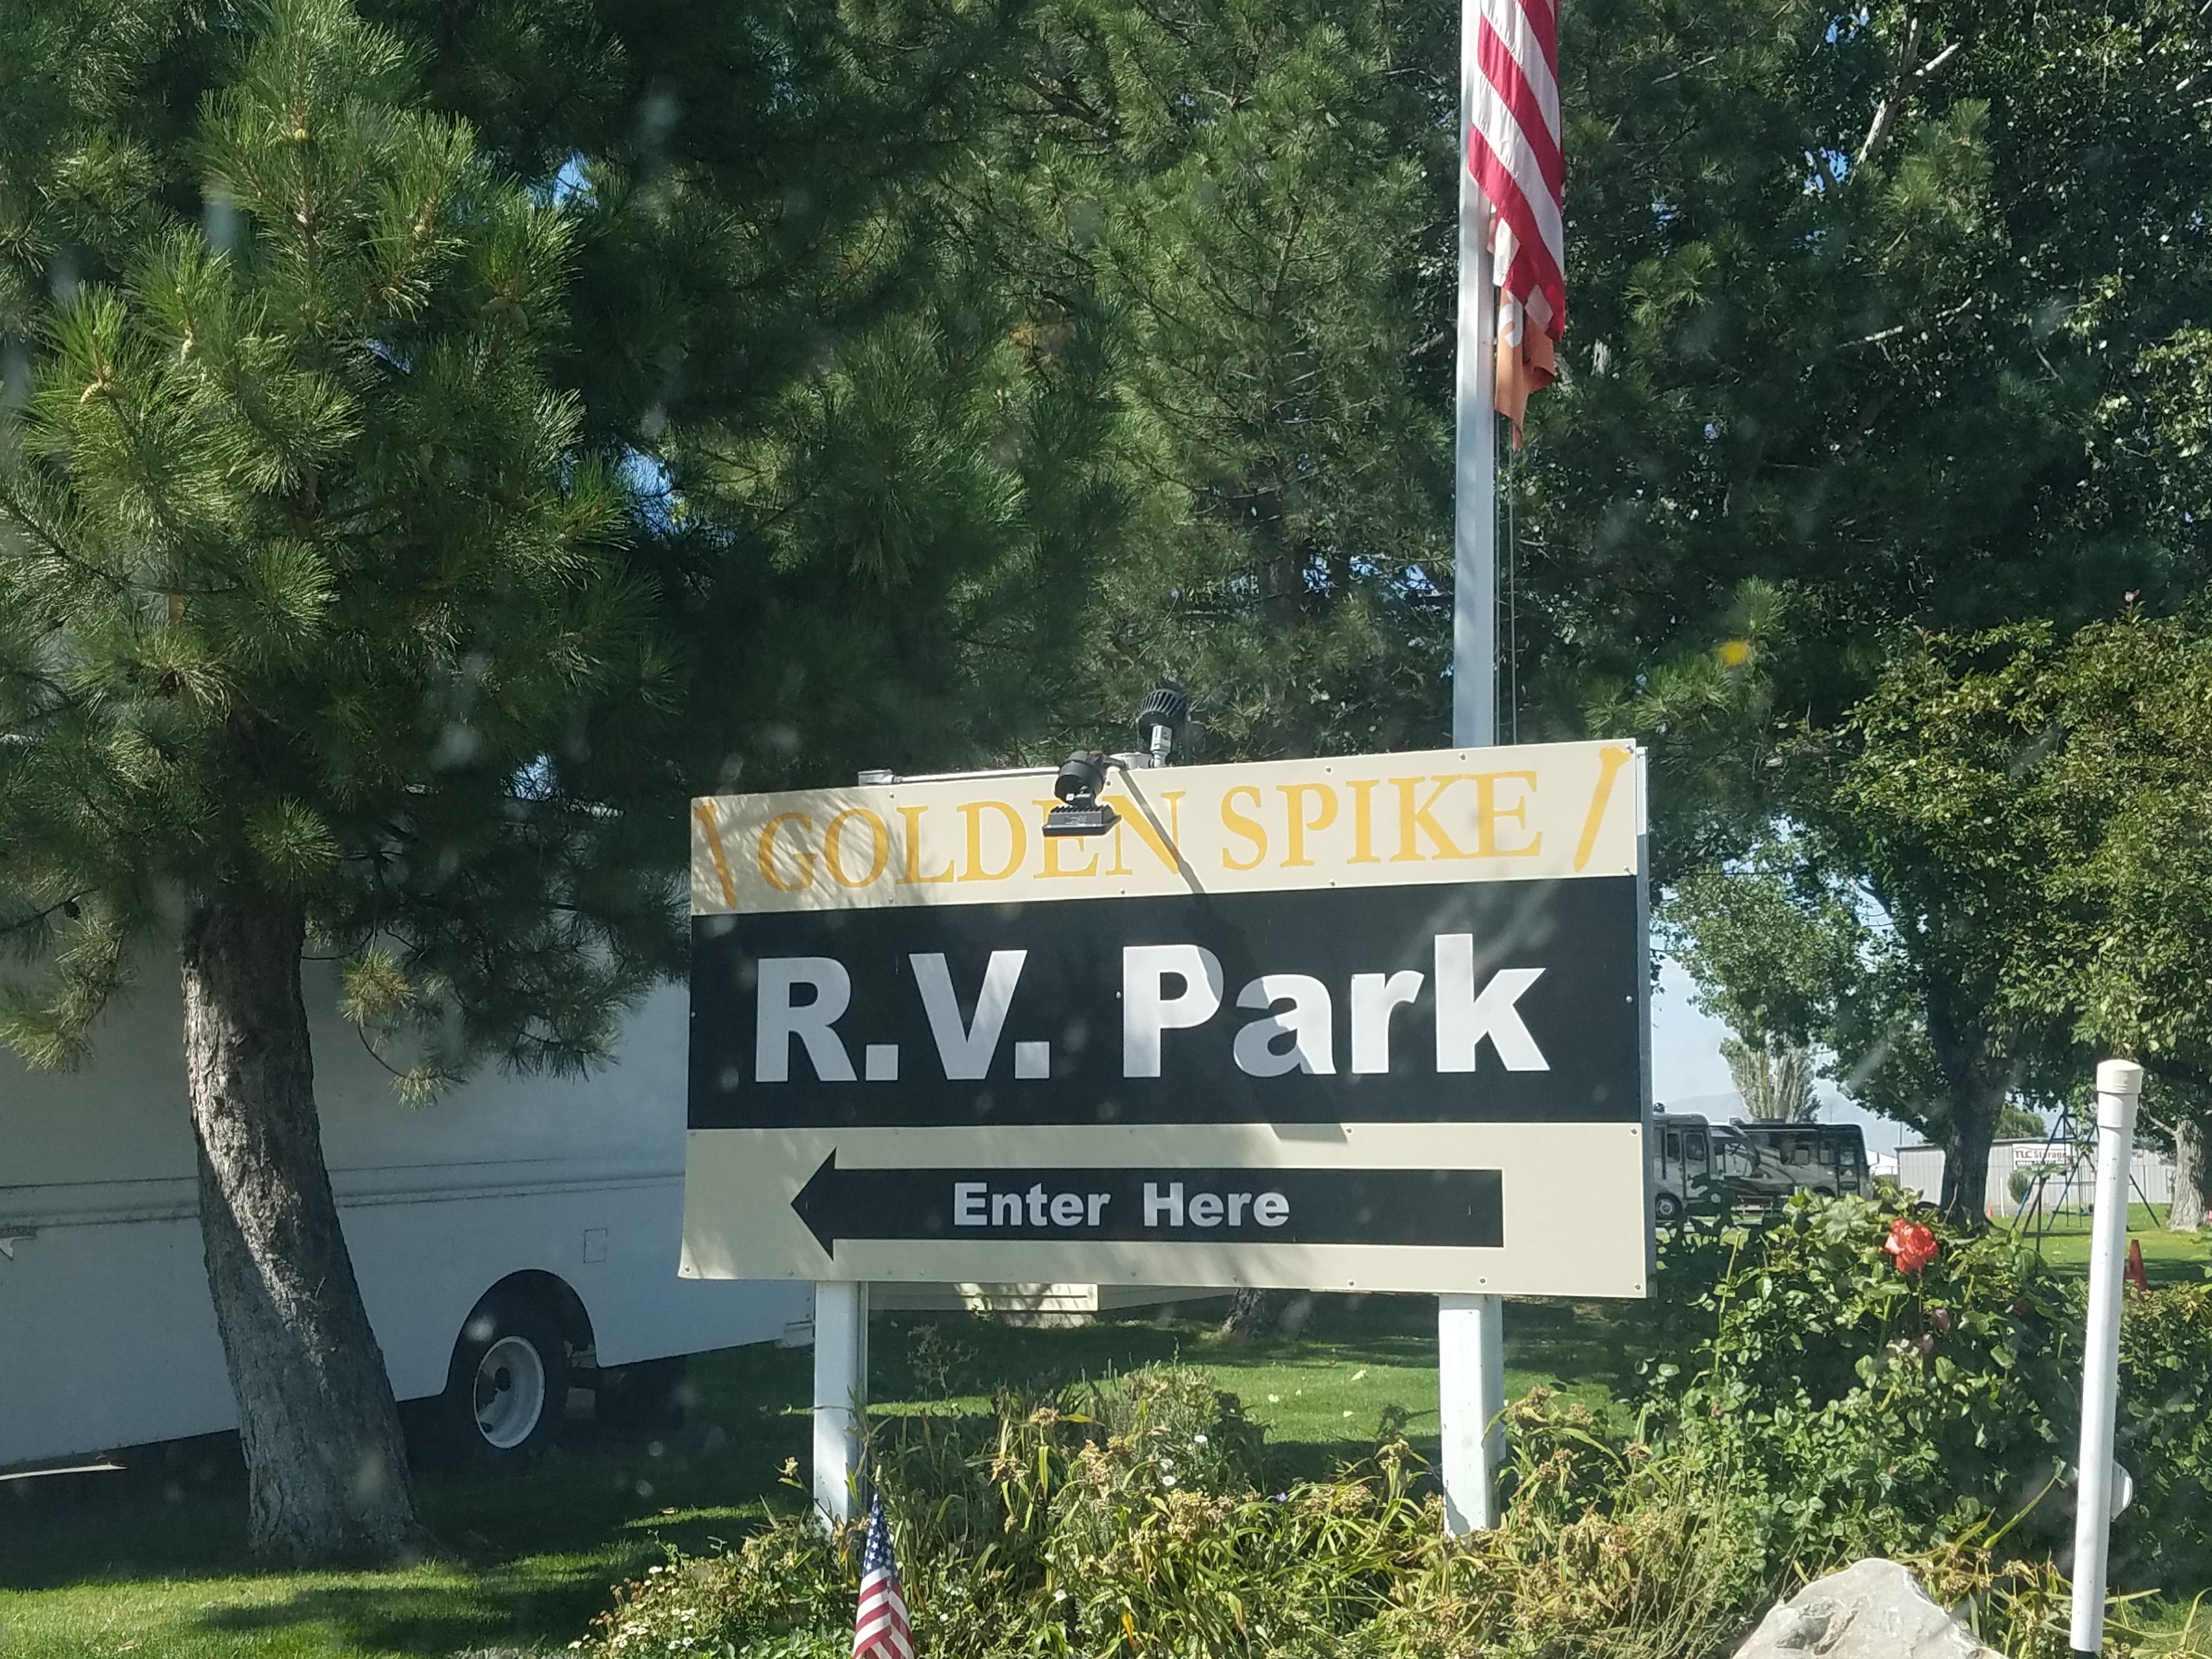 Camper submitted image from Golden Spike RV Park - 3